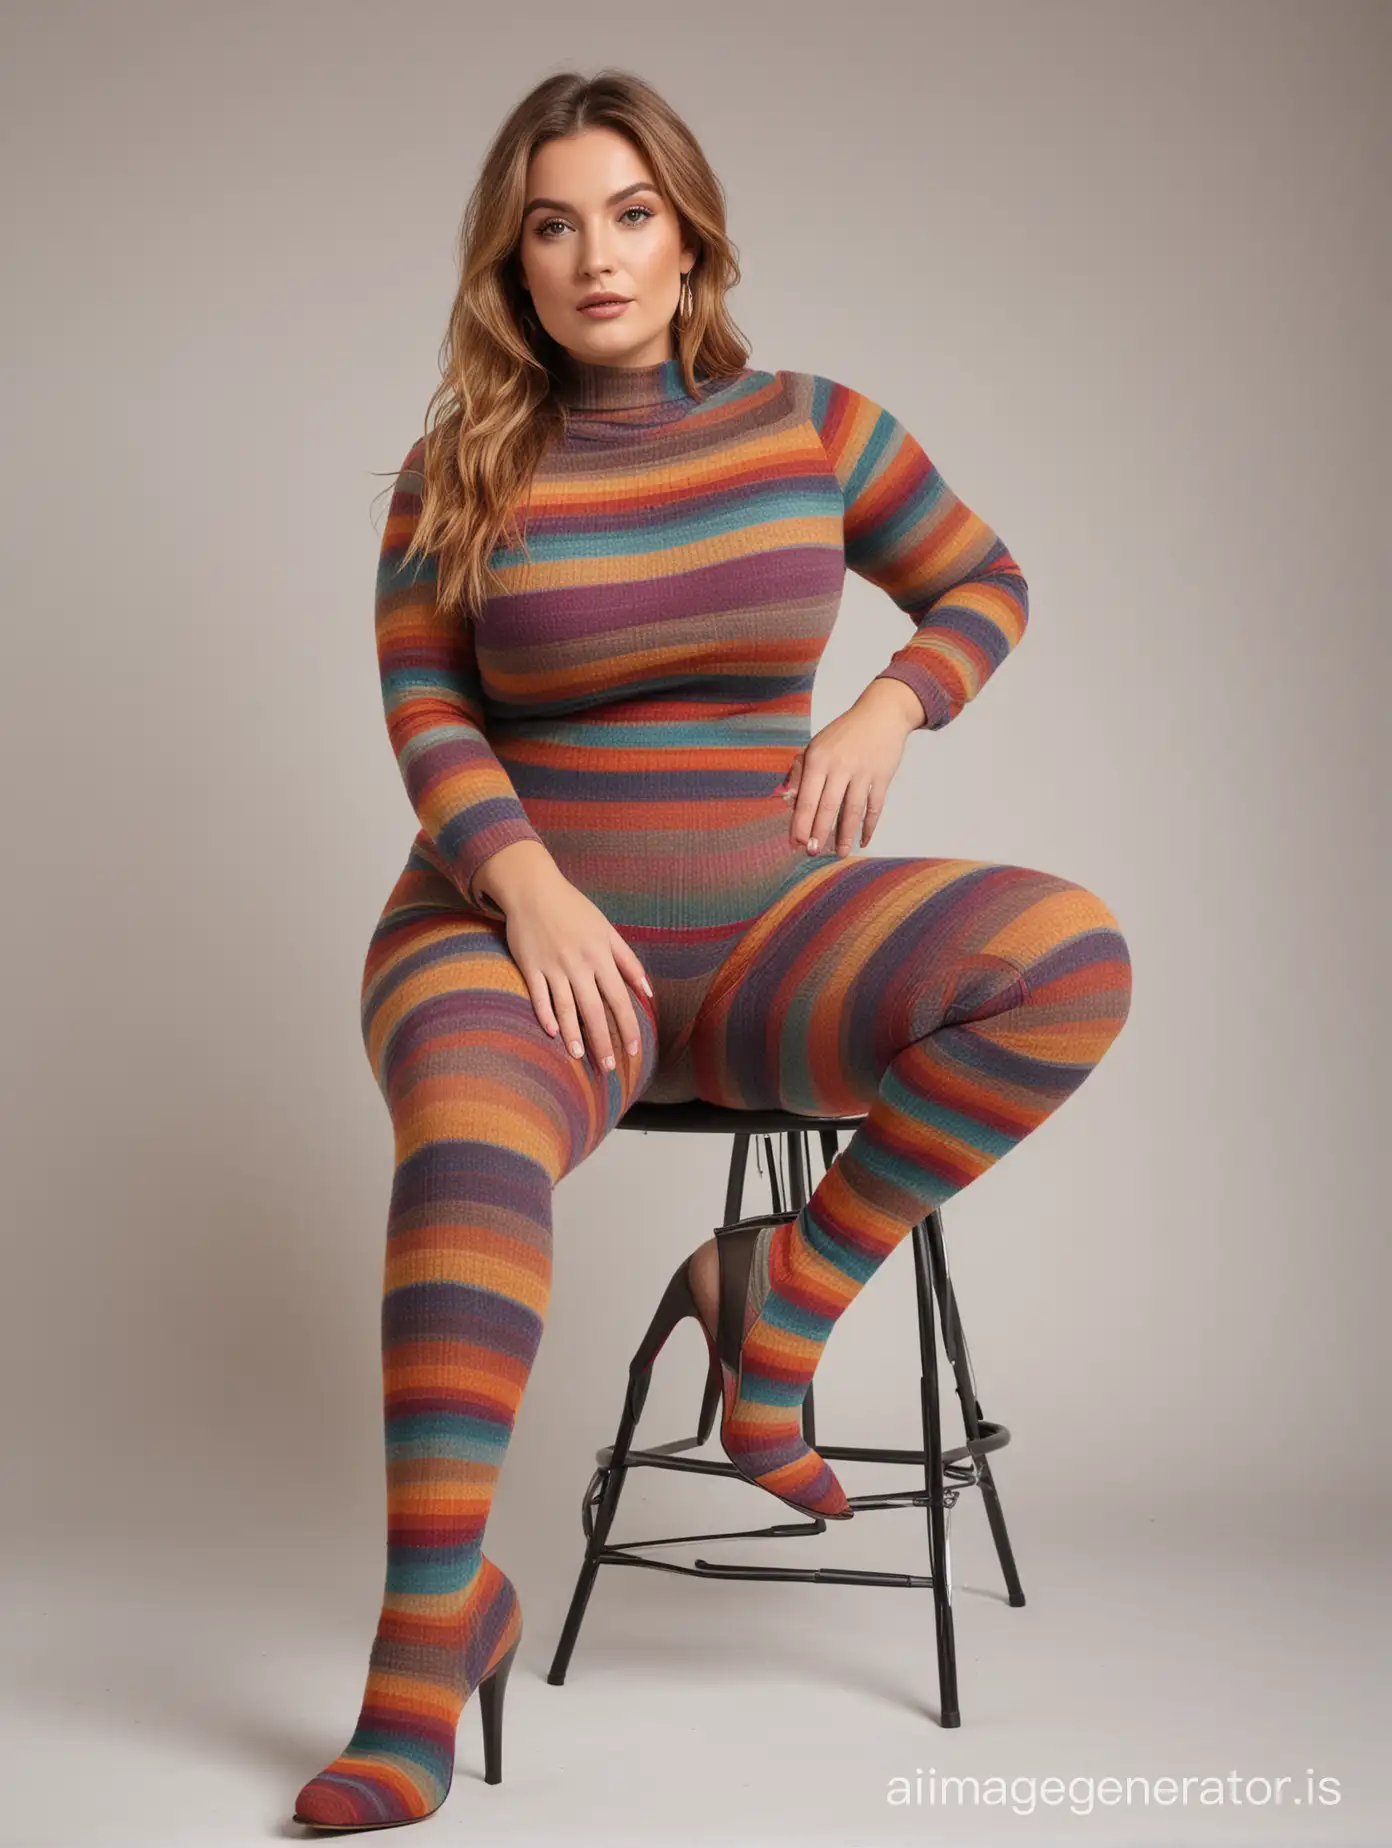 Curvy-Woman-Sitting-in-Colorful-Wool-Tights-and-High-Heels